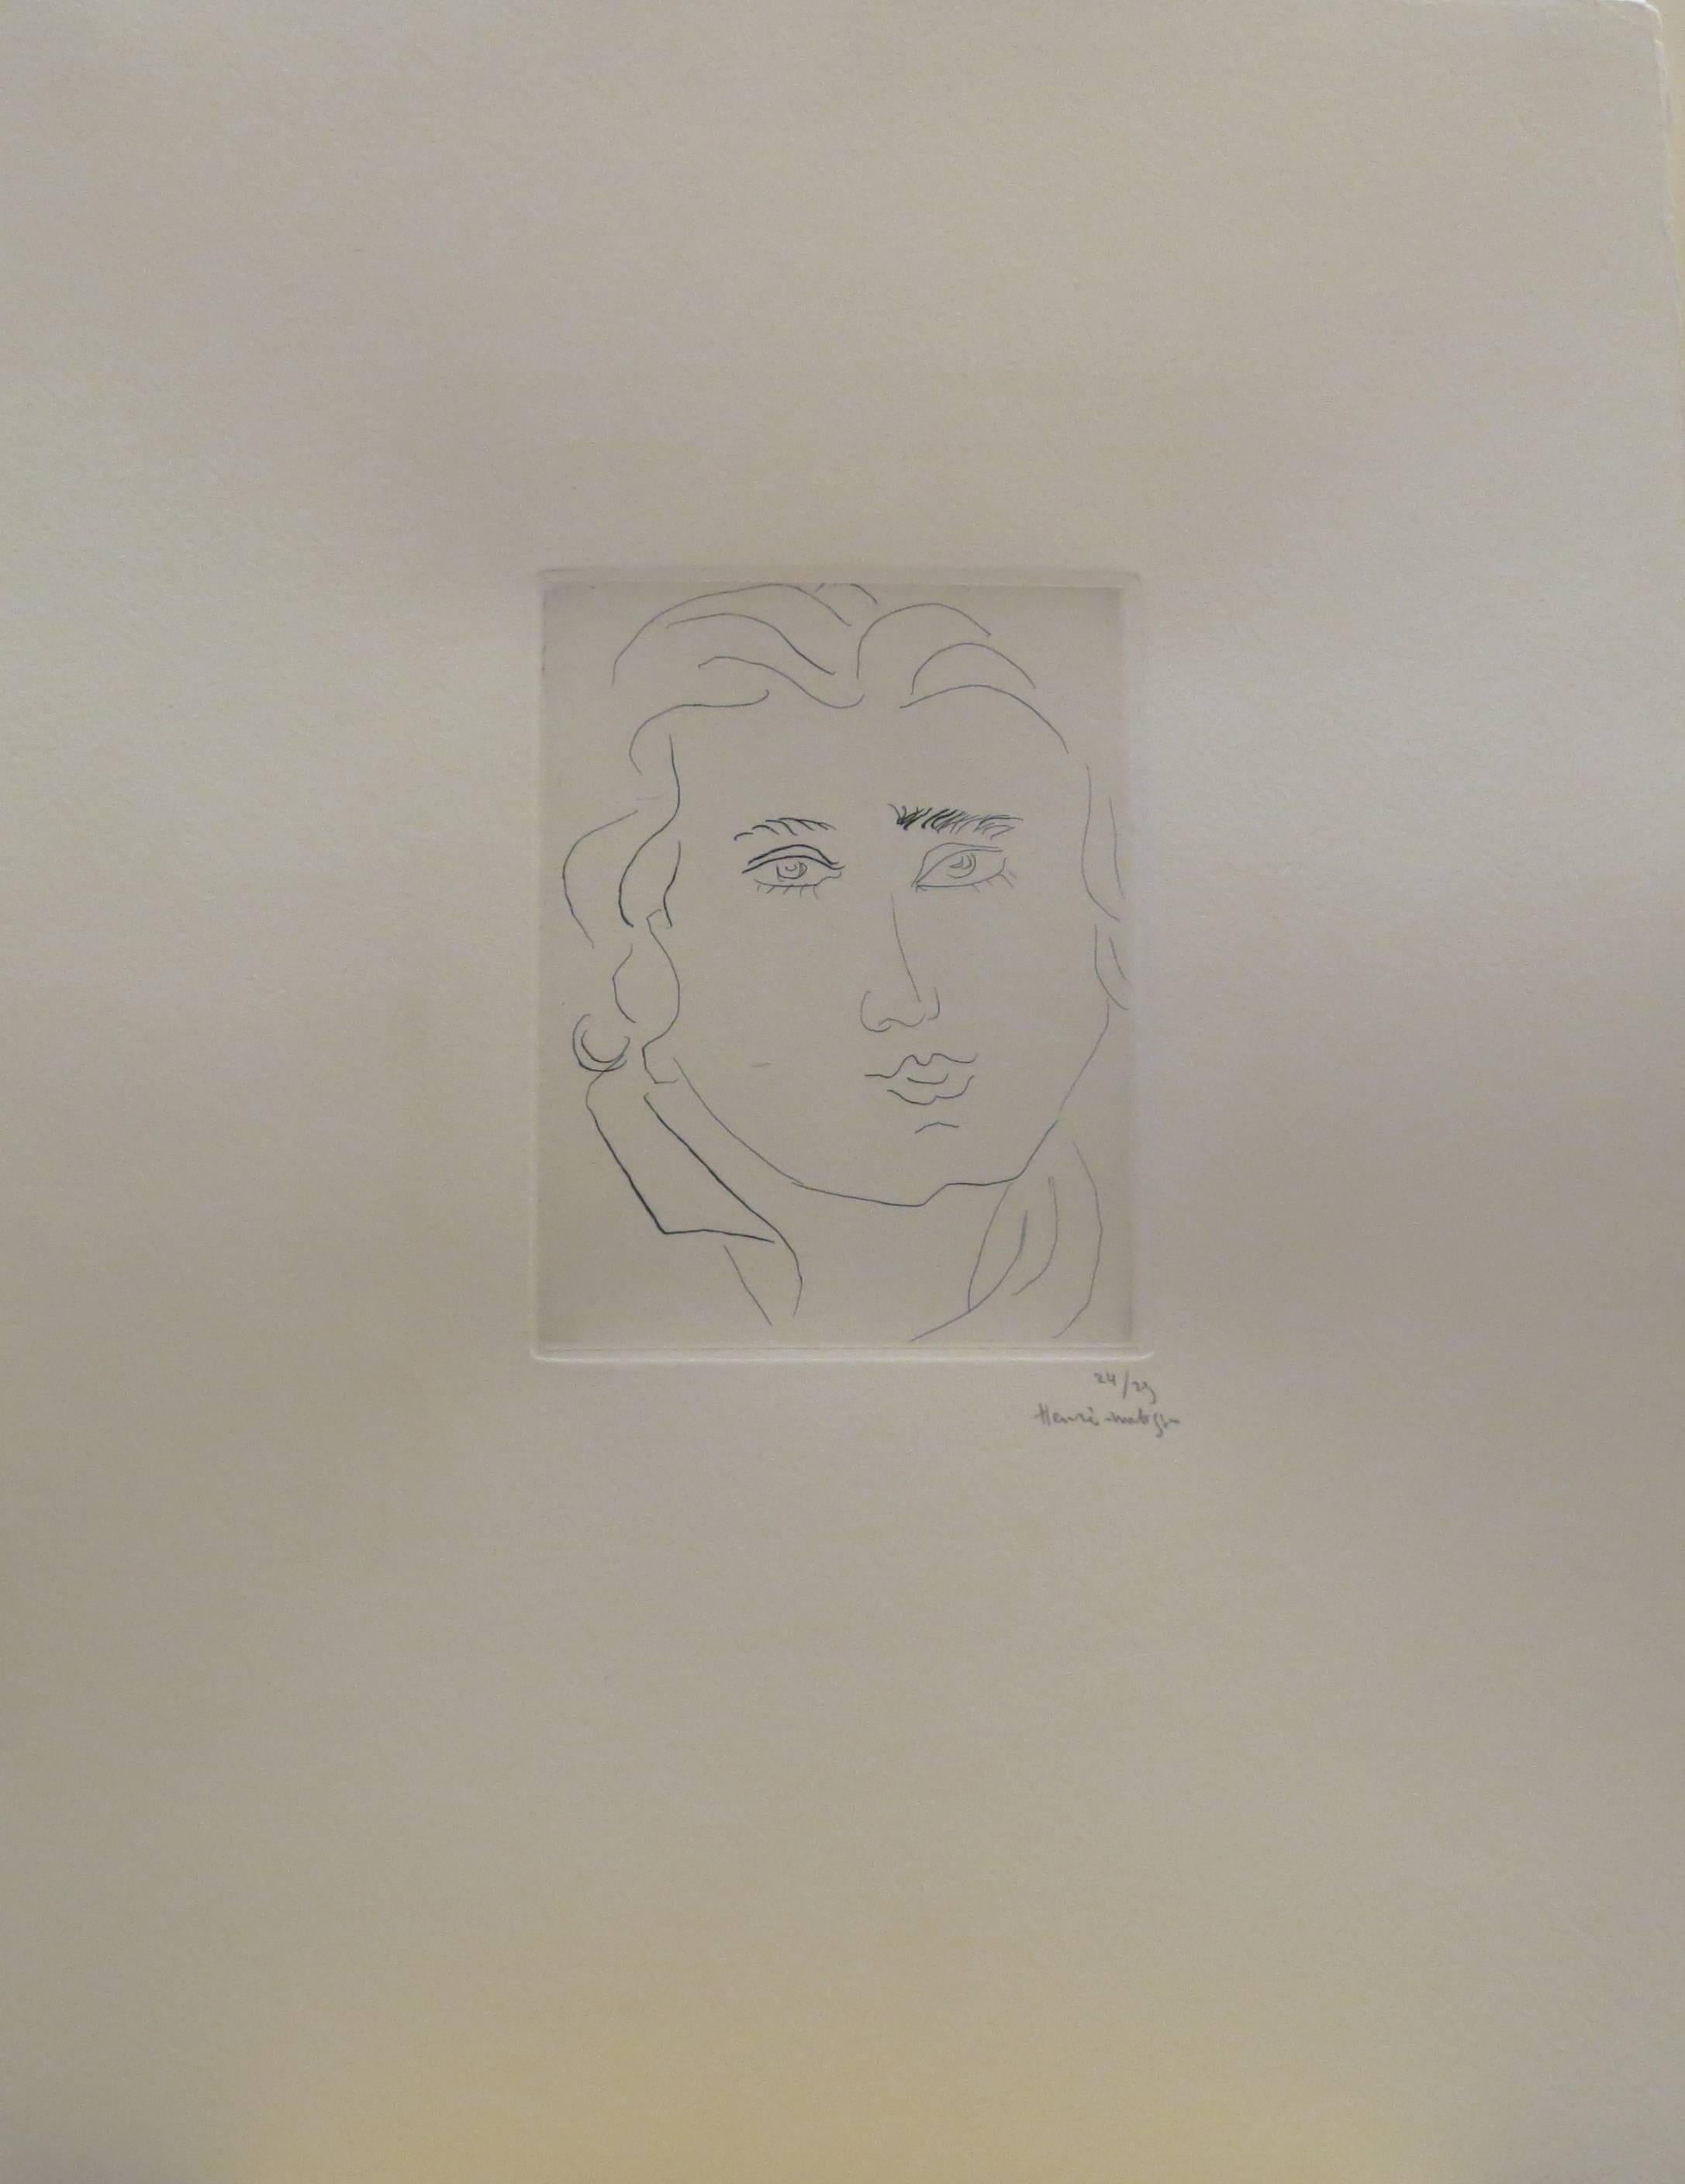 Considered one of the greatest painters of the 20th century, Matisse was engaged in printmaking during most of his artistic career, using it as a break from painting and as a way of extending his drawing process.  Rather than working with master